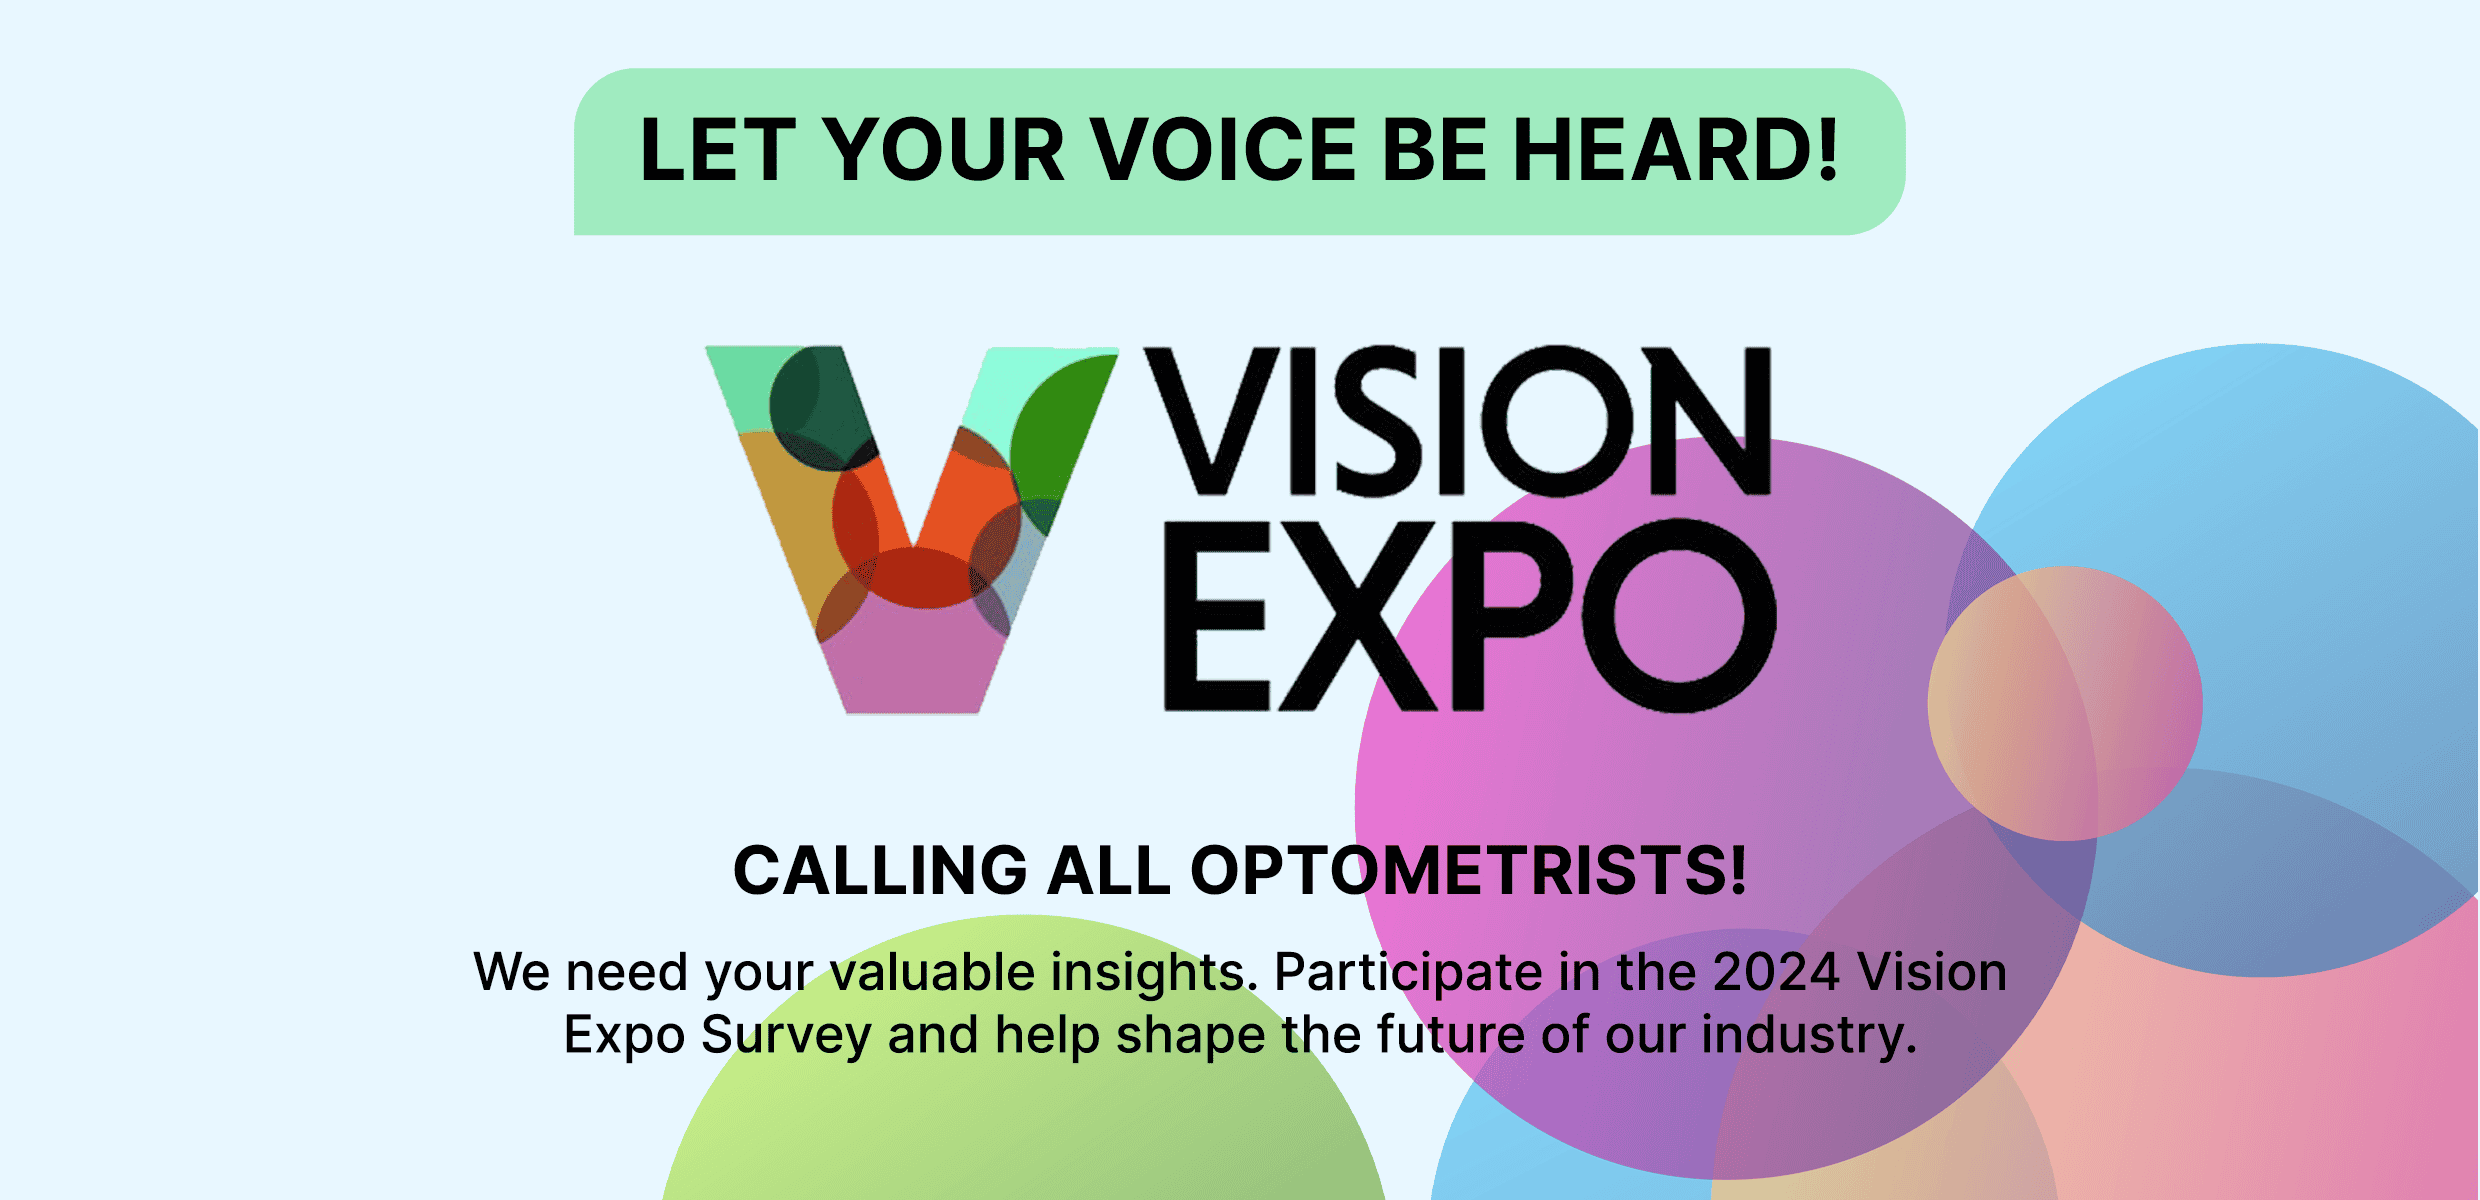 Let Your Voice Be Heard: Participate in the 2024 Vision Expo Survey!